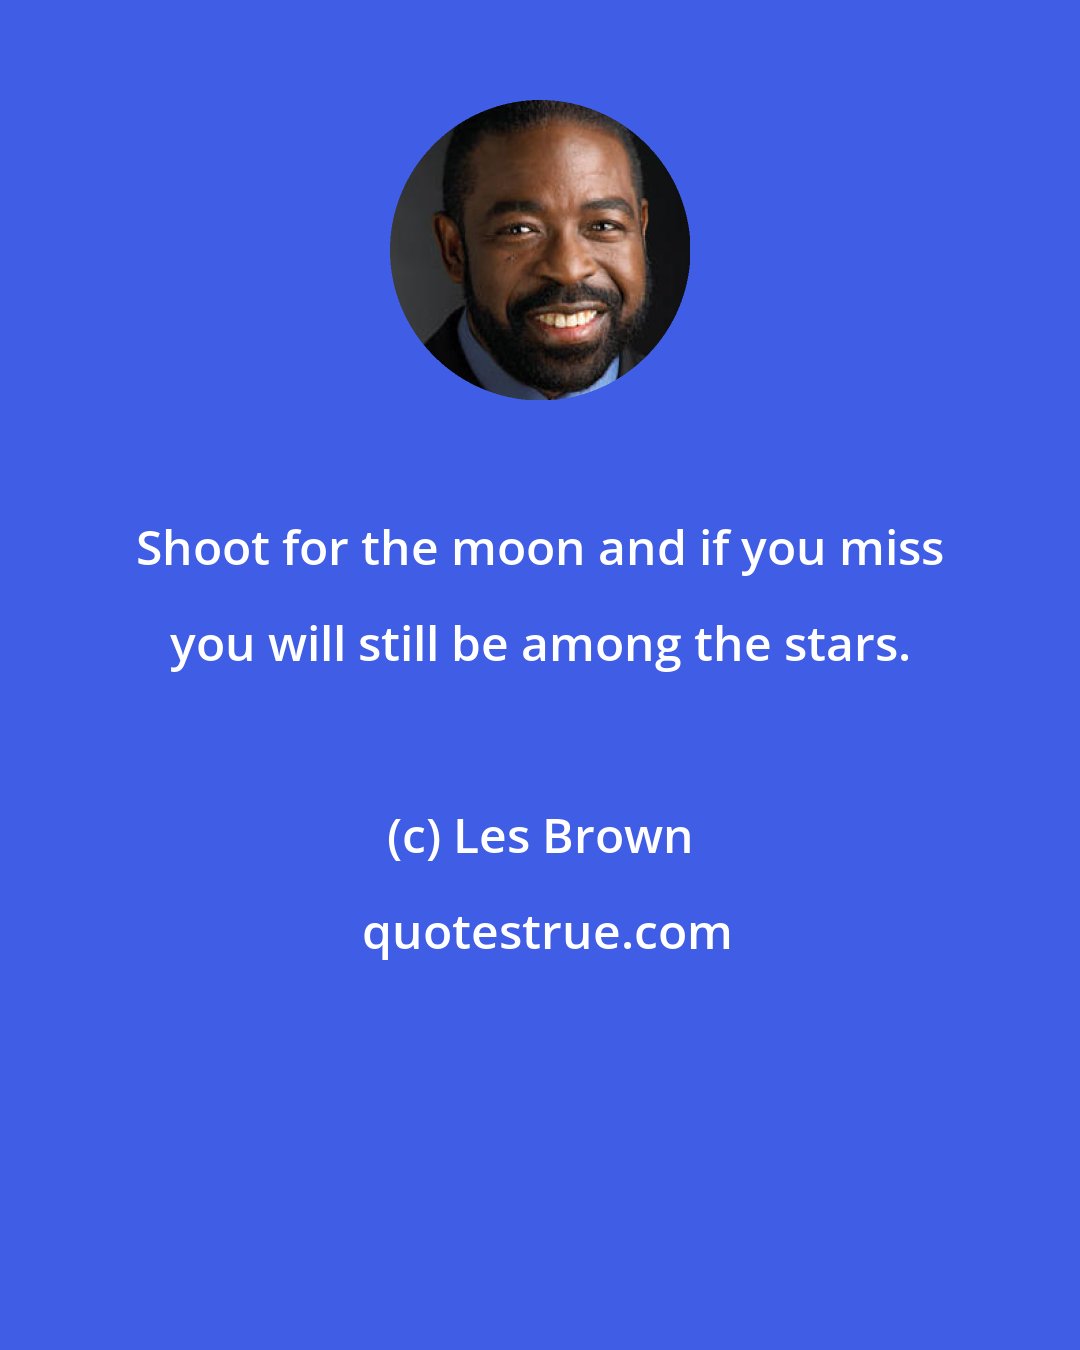 Les Brown: Shoot for the moon and if you miss you will still be among the stars.